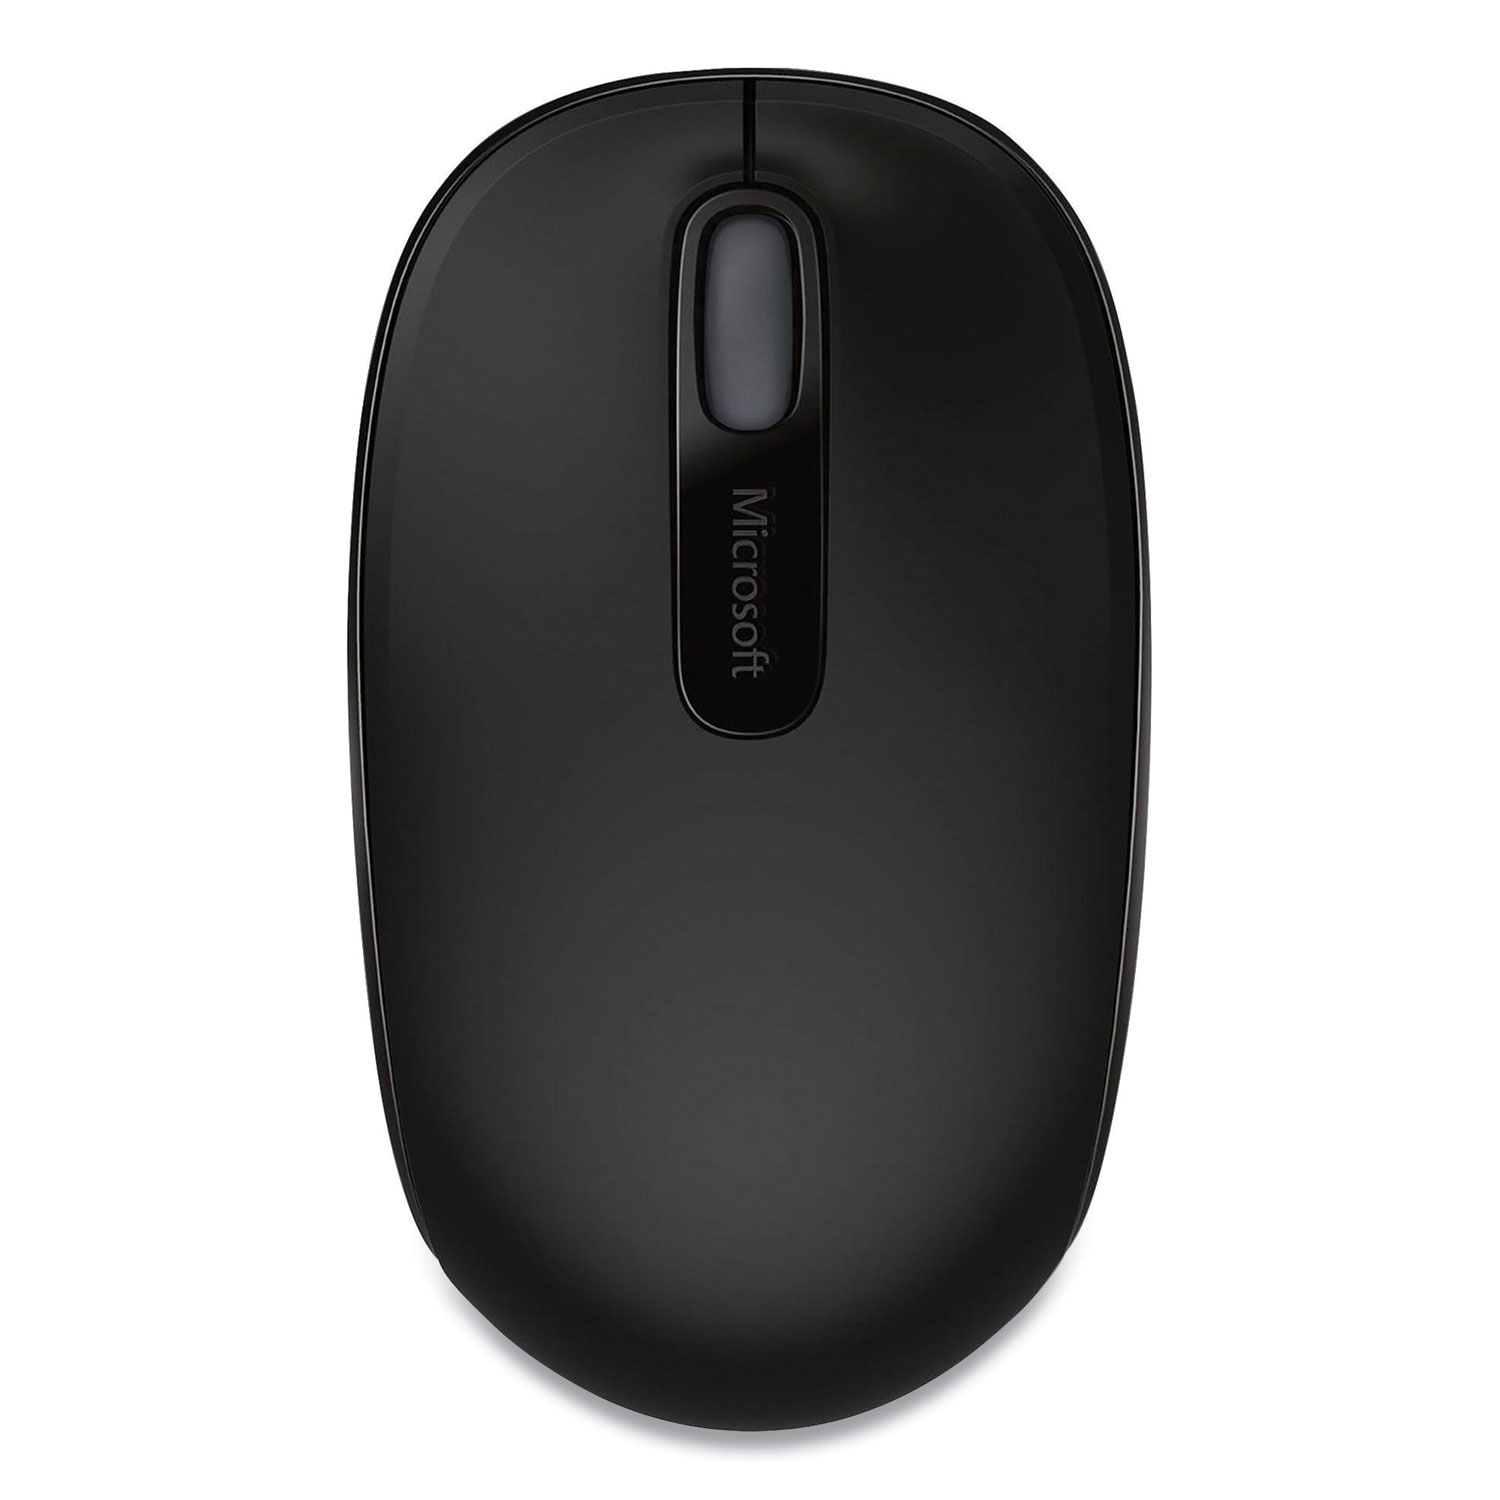  Microsoft U7Z-00001 Mobile 1850 Wireless Optical Mouse, 2.4 GHz Frequency/16.4 ft Wireless Range, Left/Right Hand Use, Black (MSF159219) 